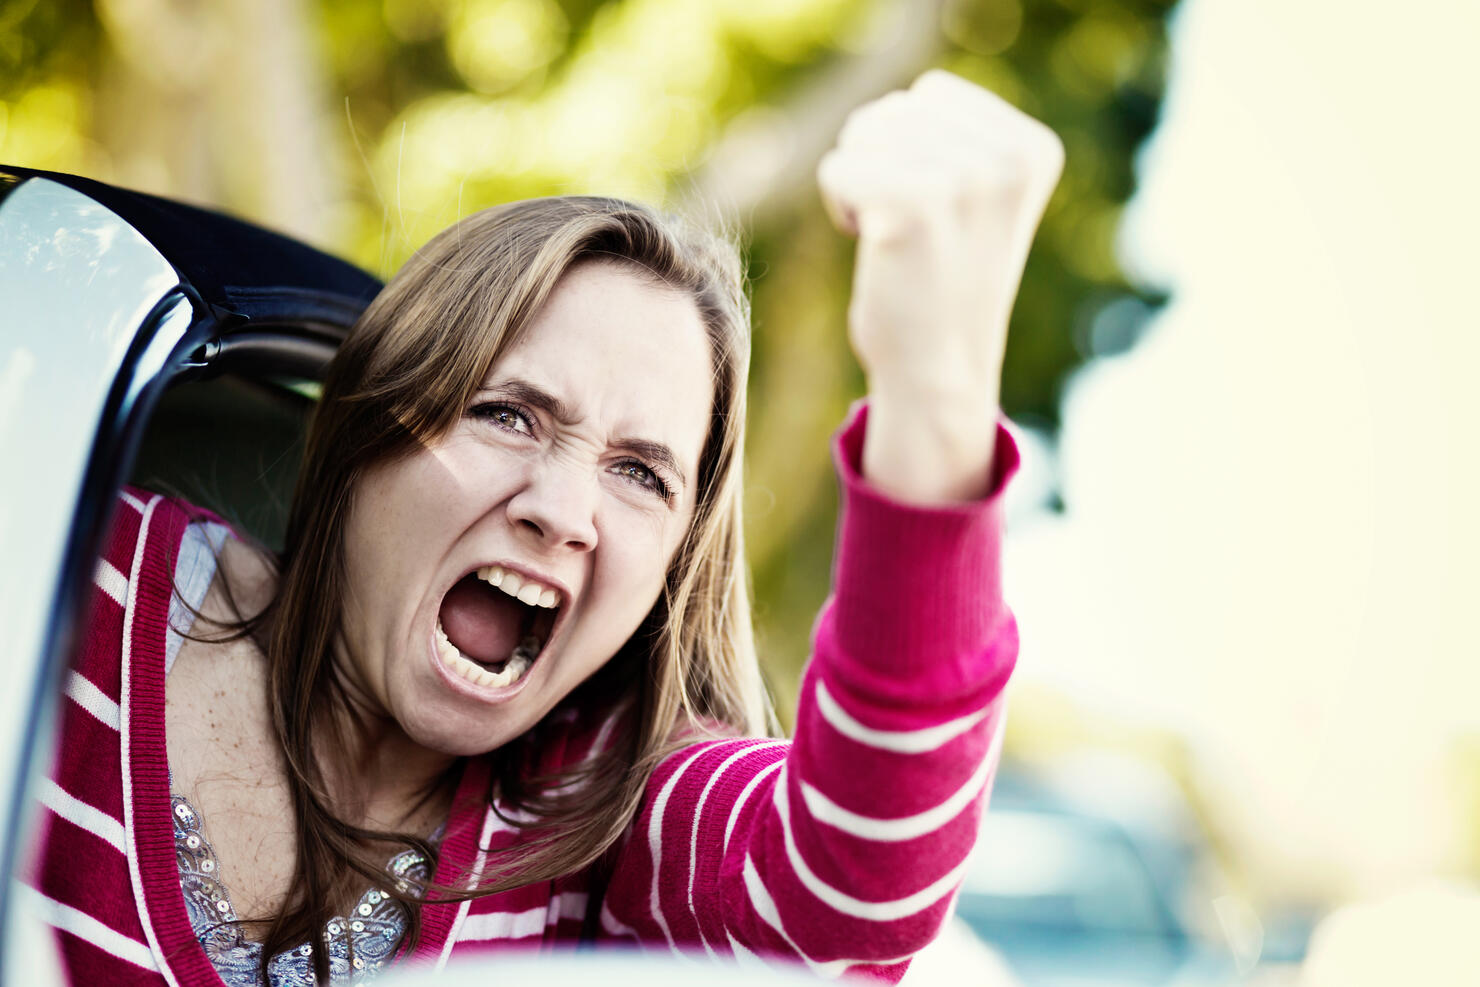 Women drivers get road rage too! Furious female shaking fist